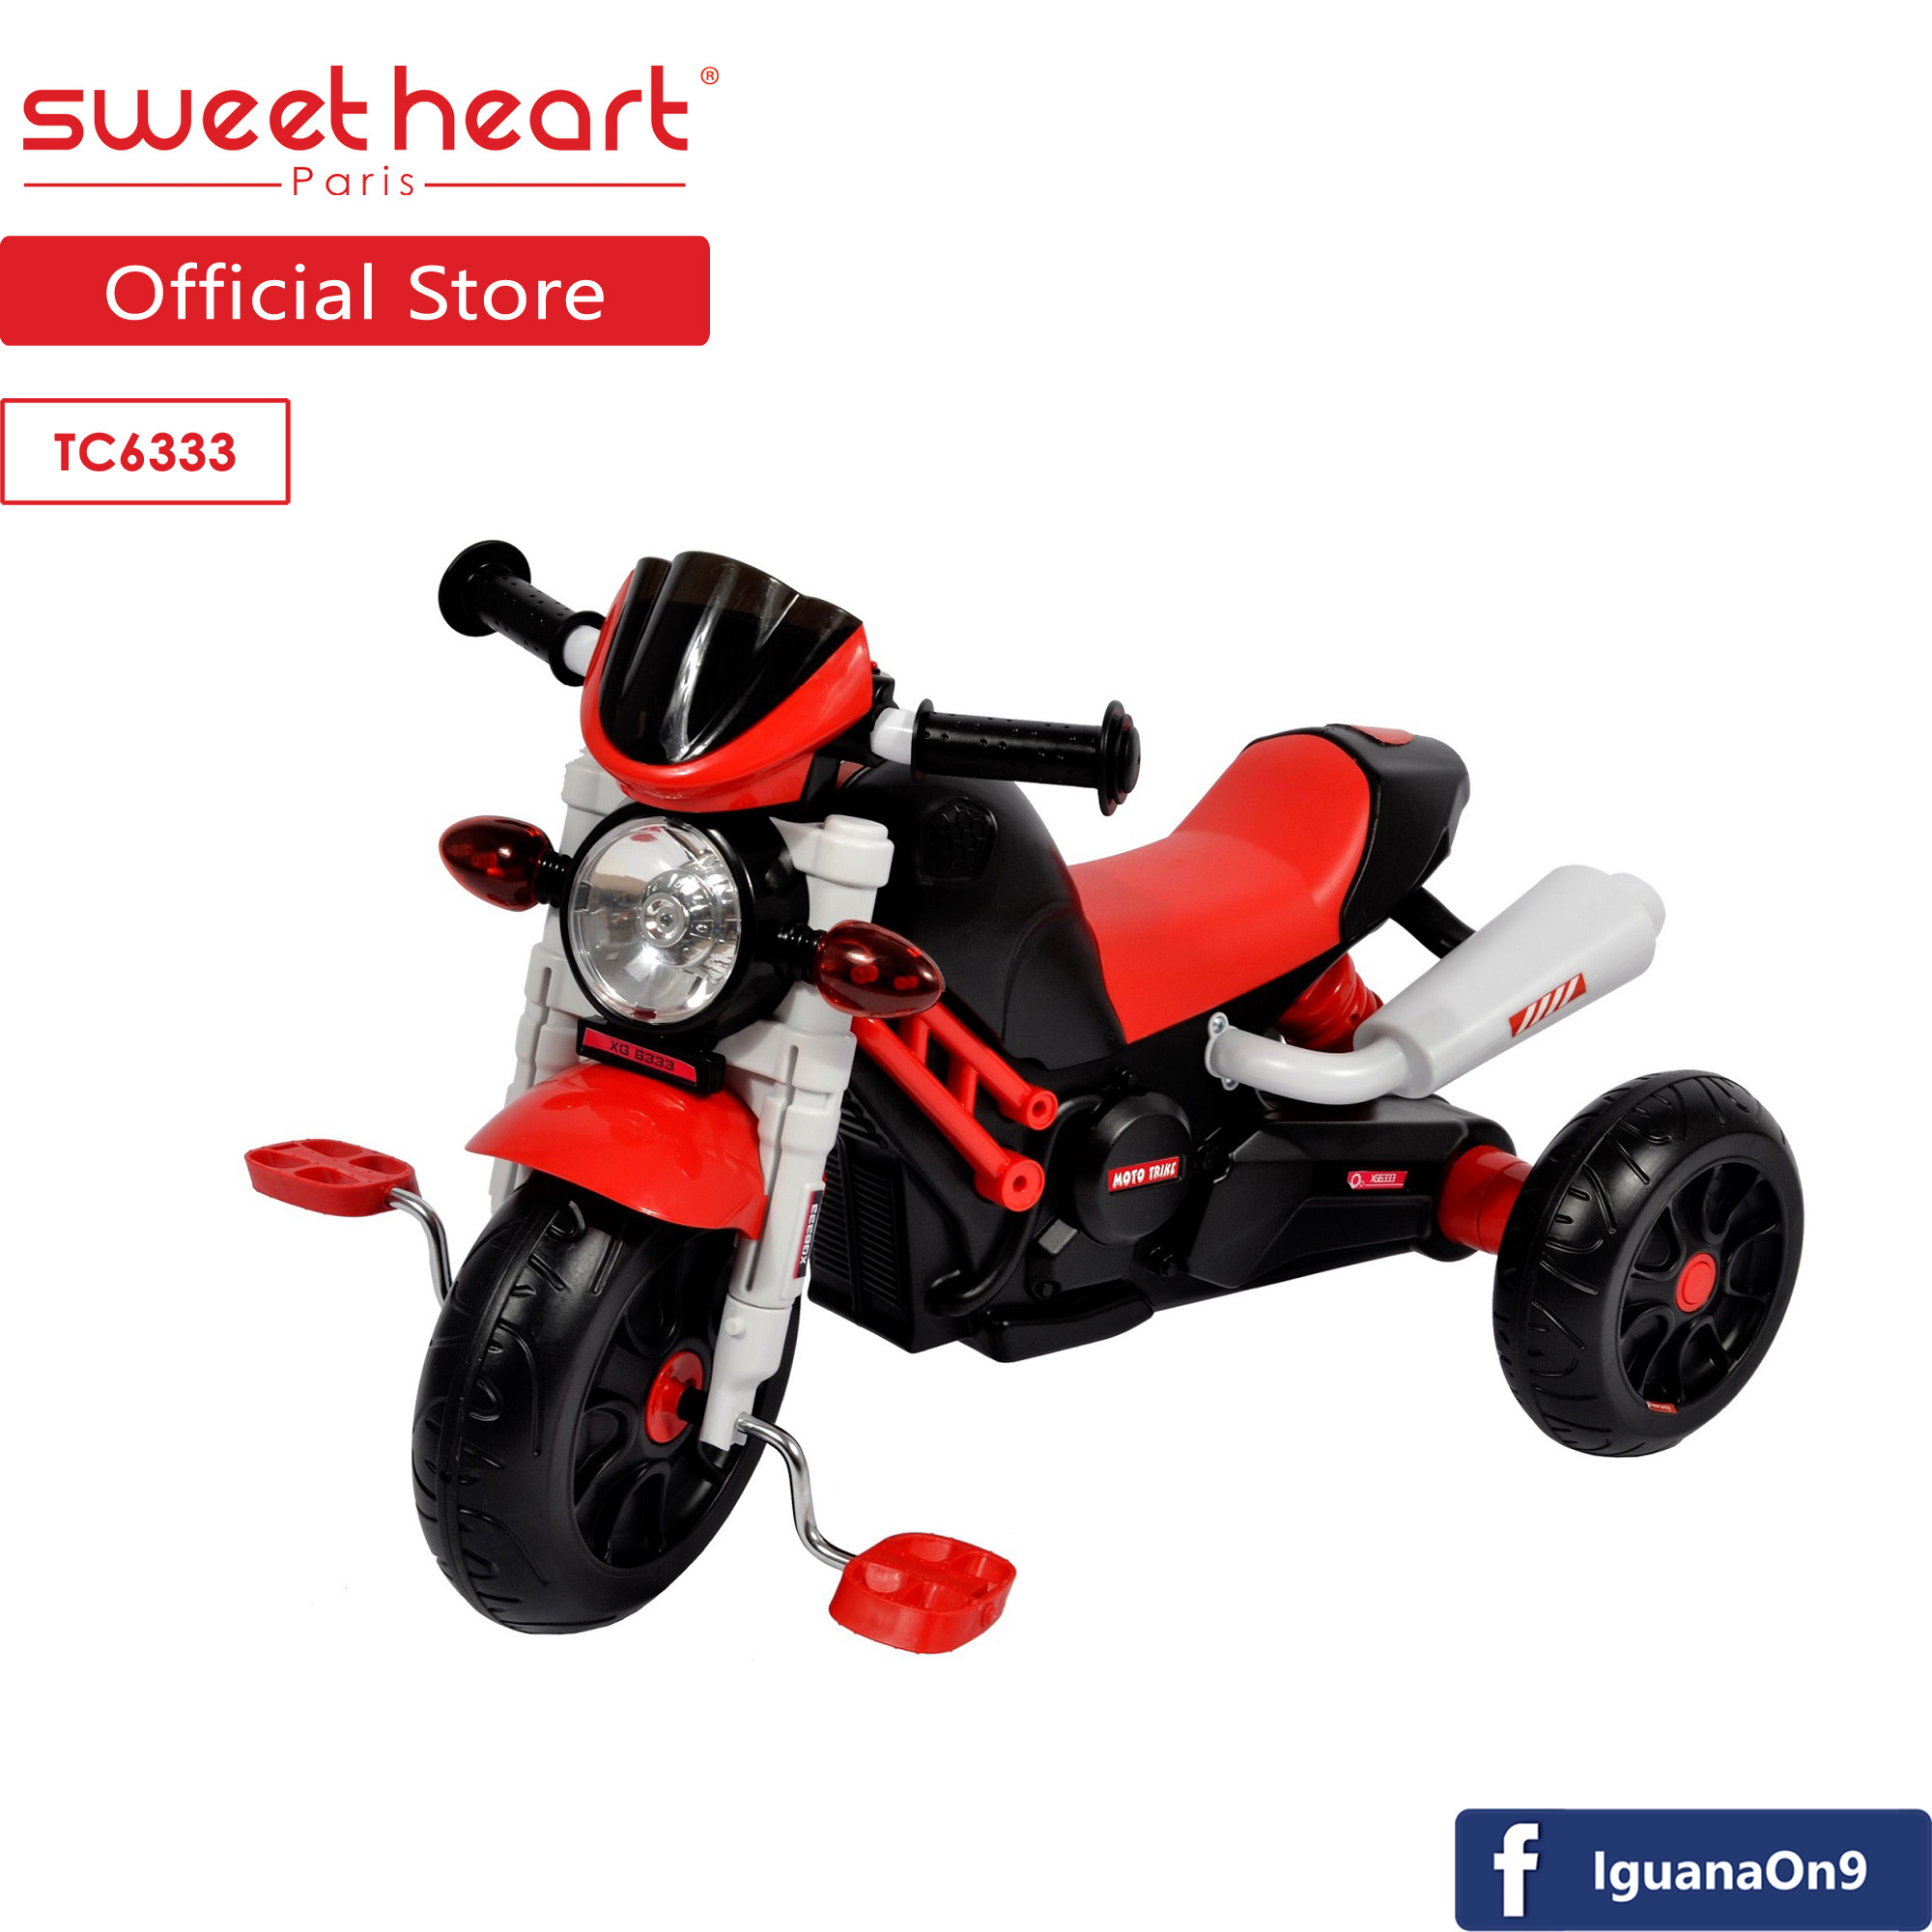 Sweet Heart Paris TC6333 Children Tricycle Motorcycle Design Red ...